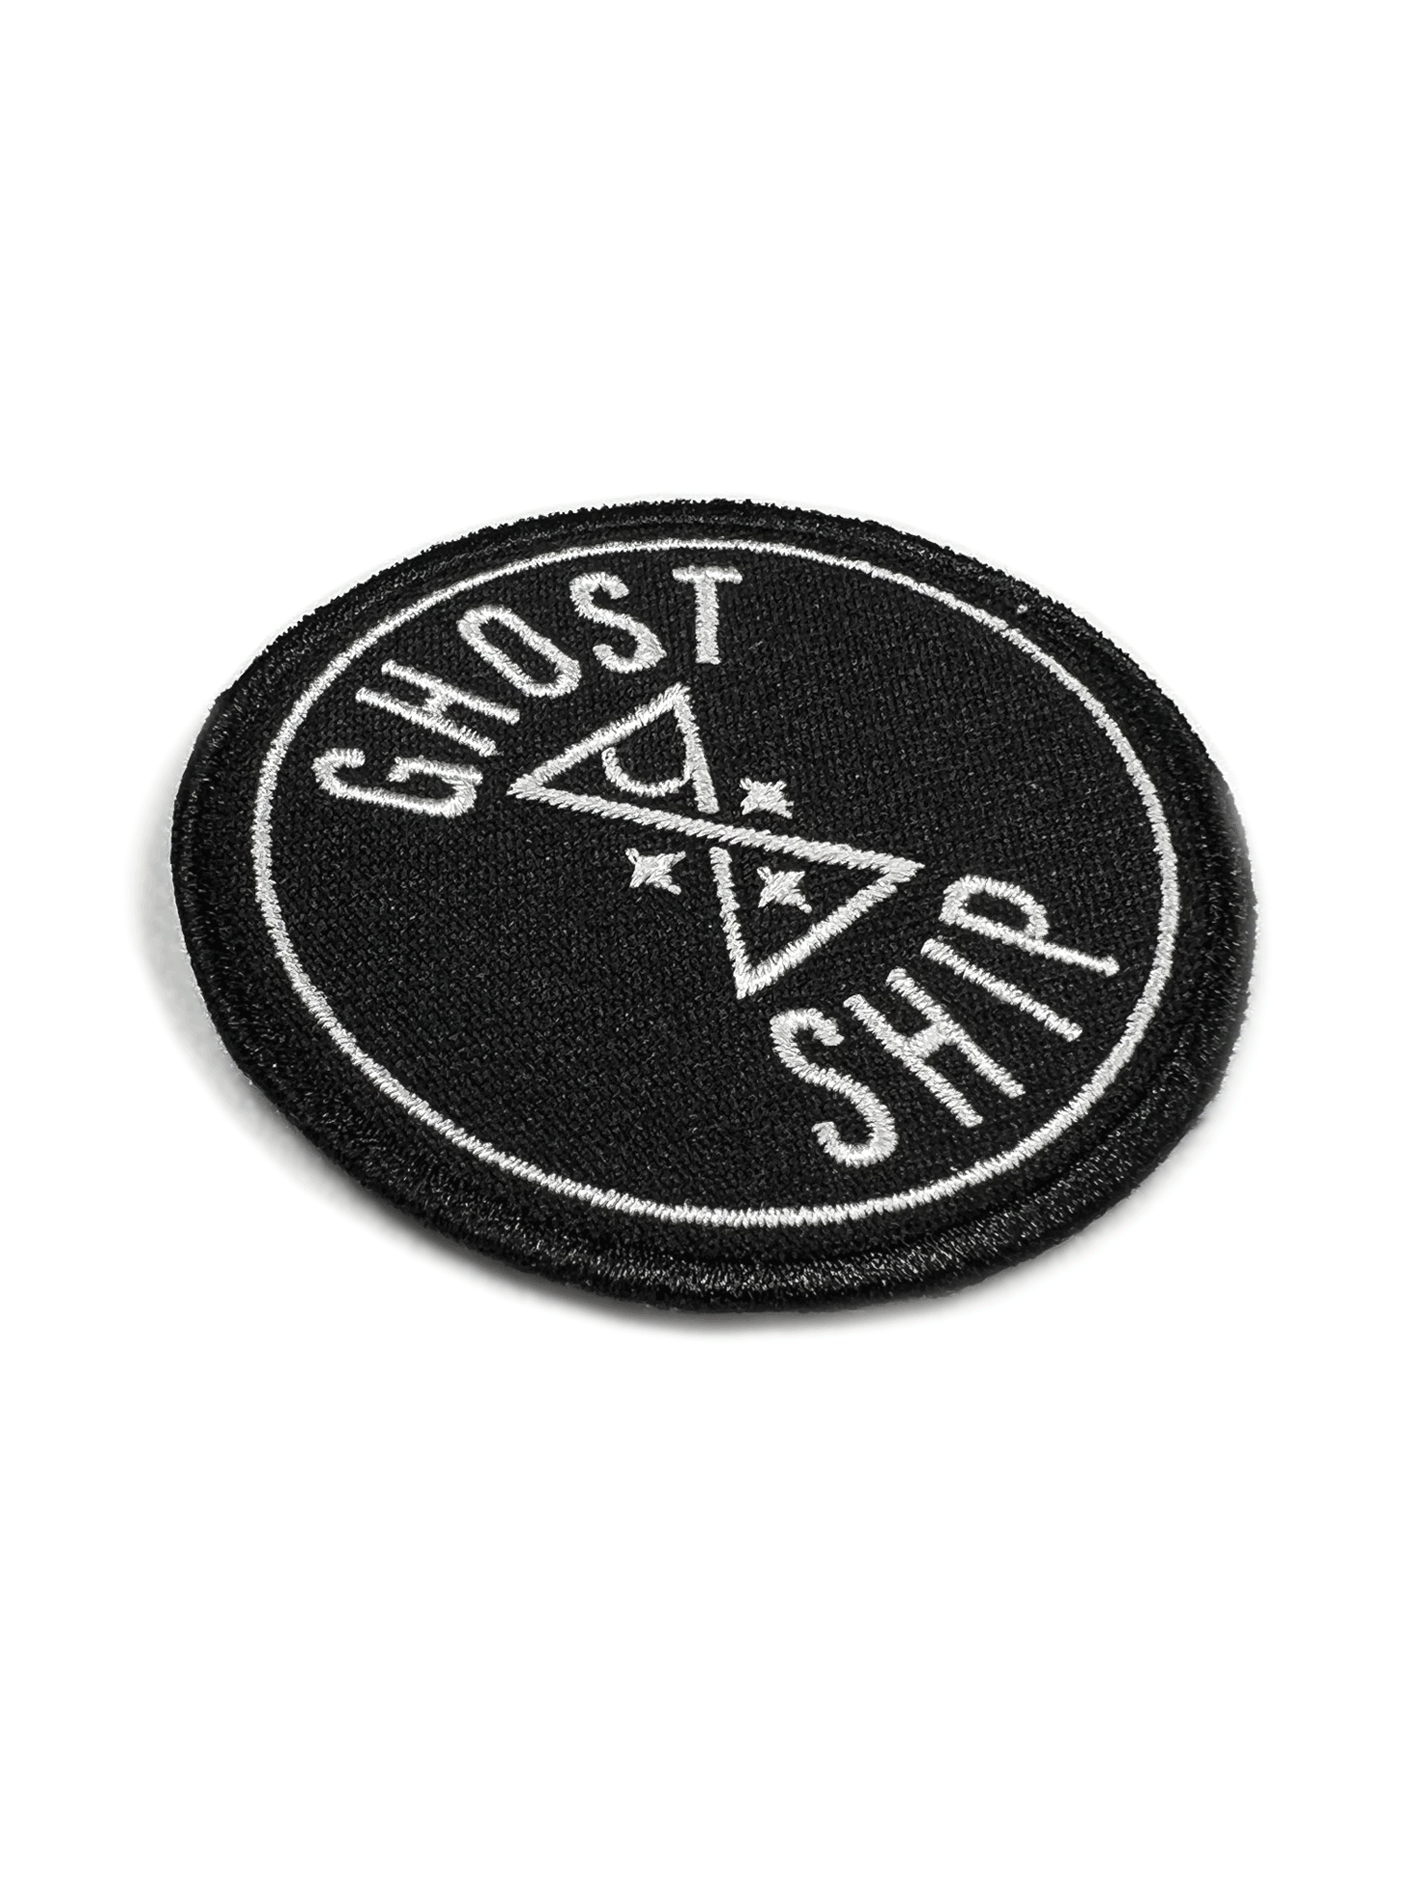 Postal Logo Embroidered Circle Patch - GHOSTSHIP.Supply